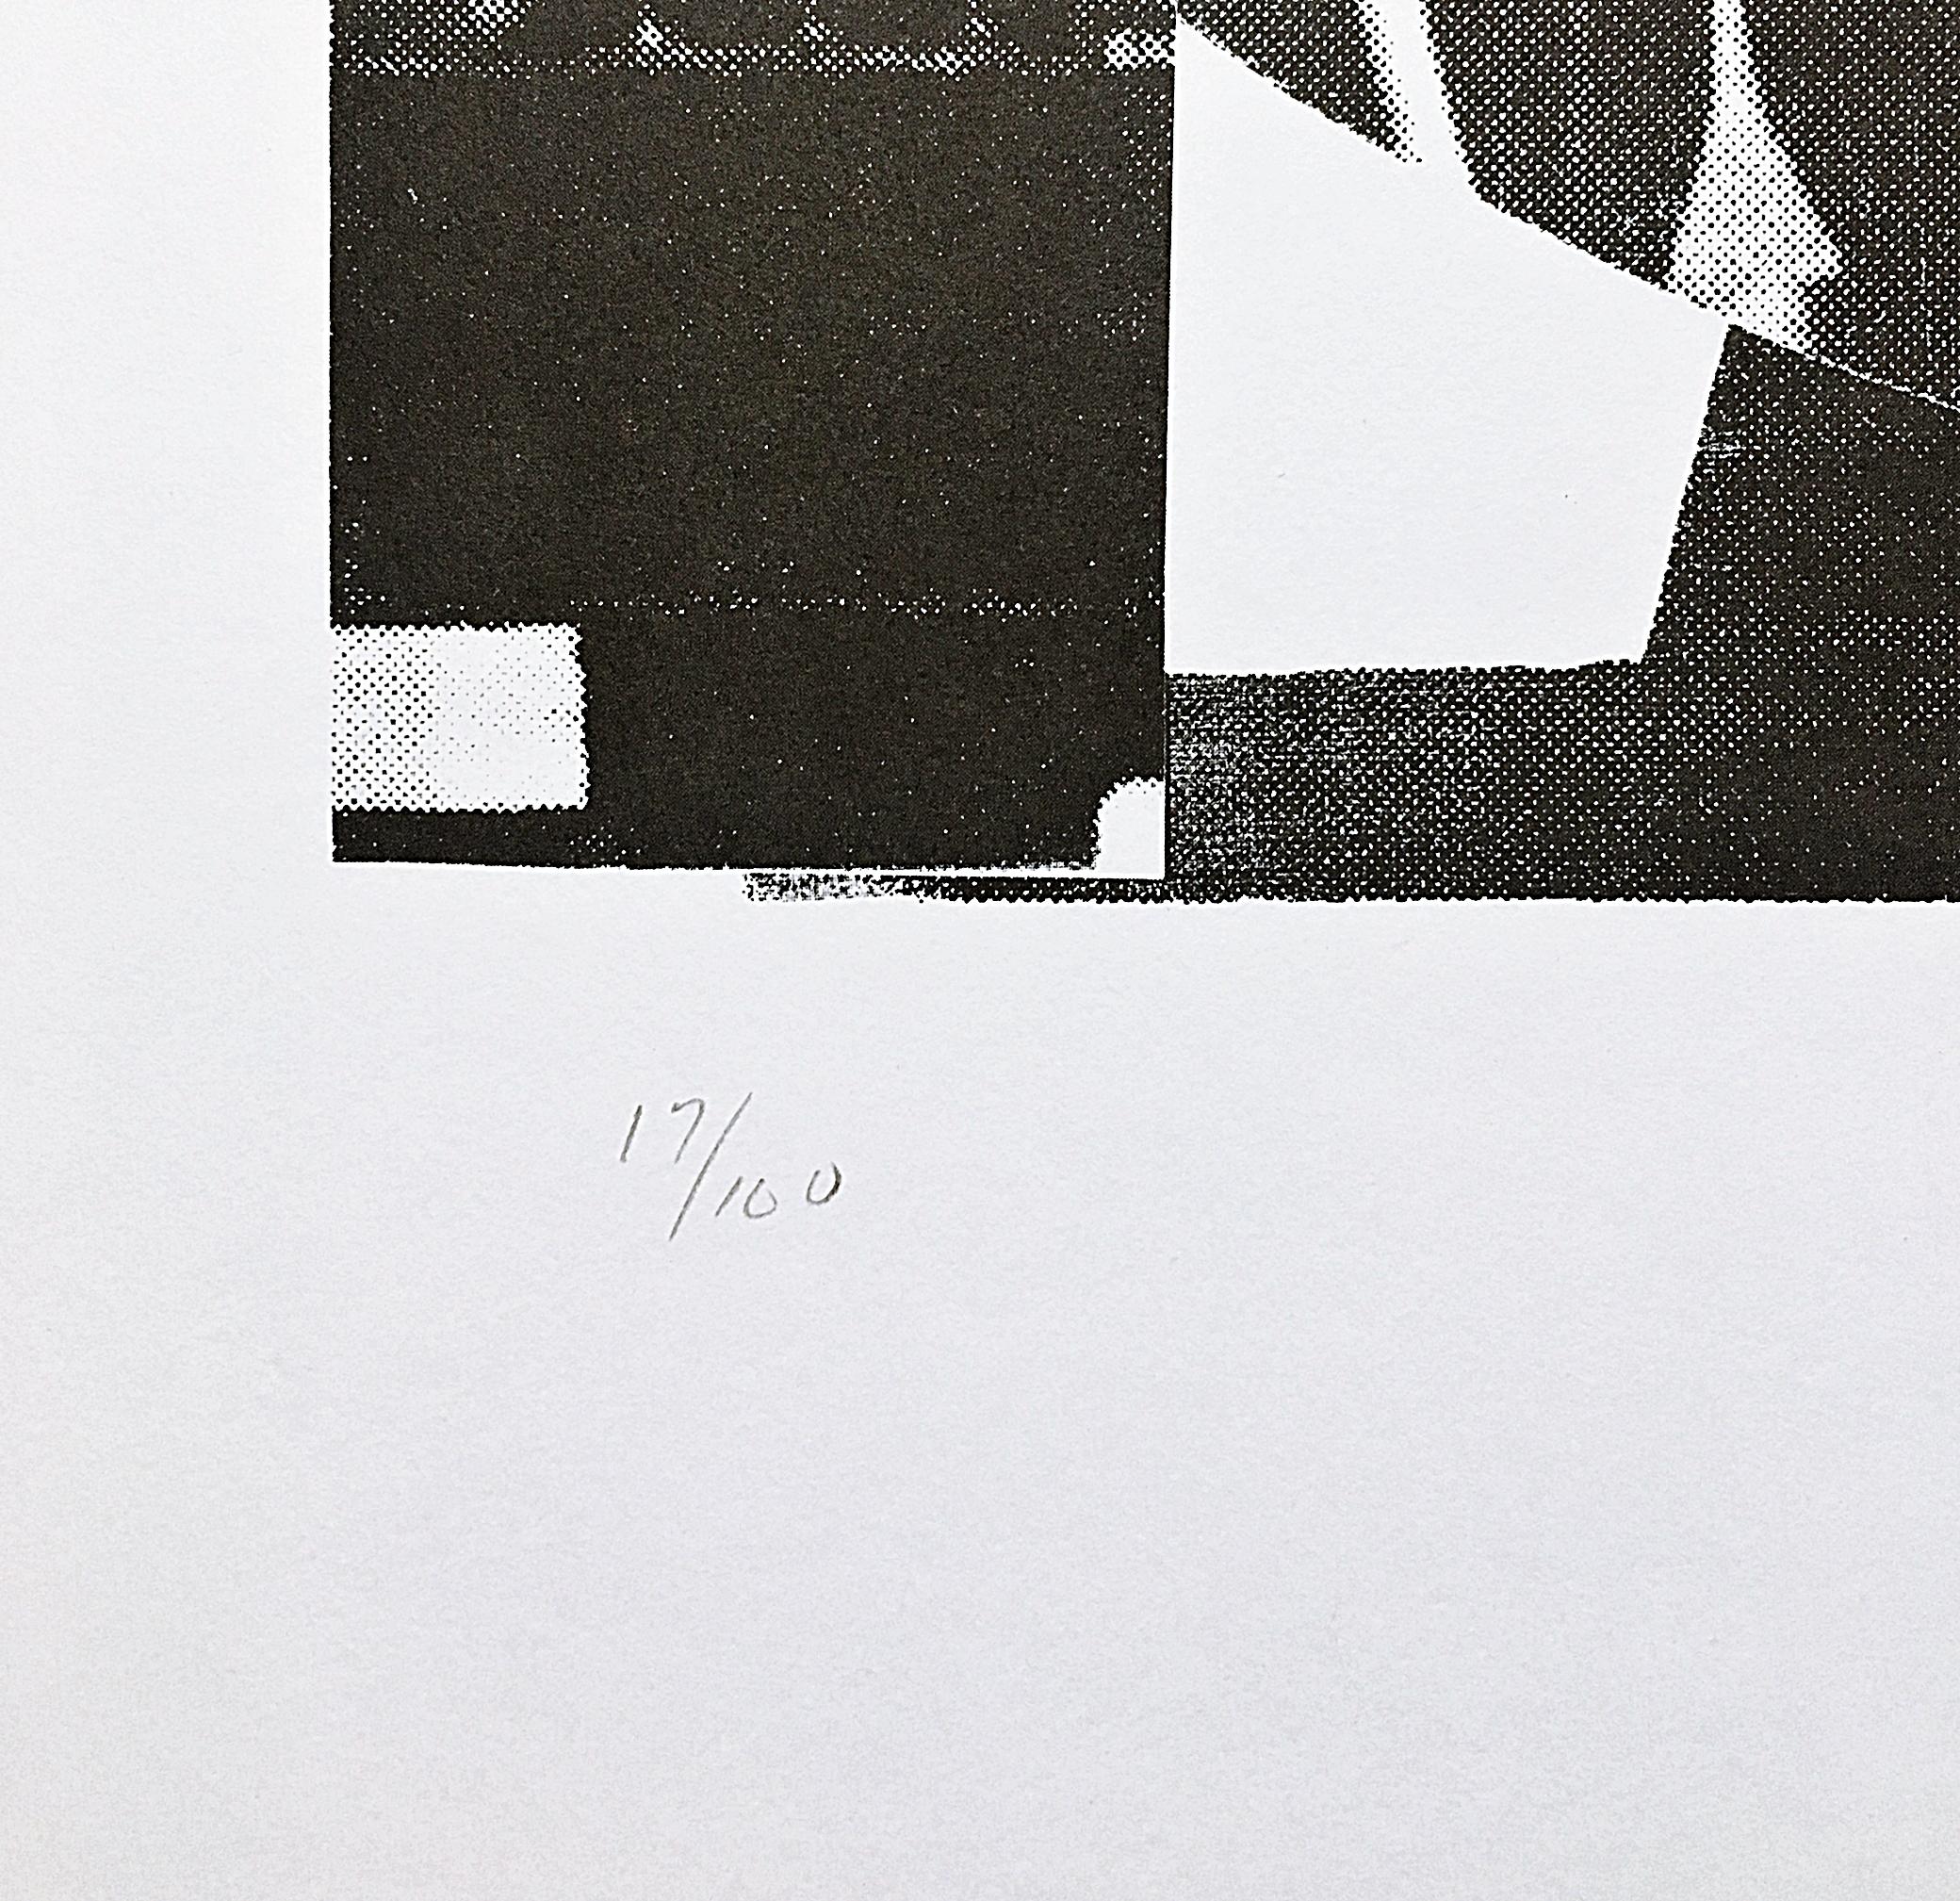 Louise Nevelson
Night Reflections, 1968
Silkscreen on wove paper
Hand signed by the artist in ink and graphite pencil on the lower right front and numbered 17/100 lower left
Bibliography:
A model of culture finance. Jonas Verlag, Marburg 2002 (p.